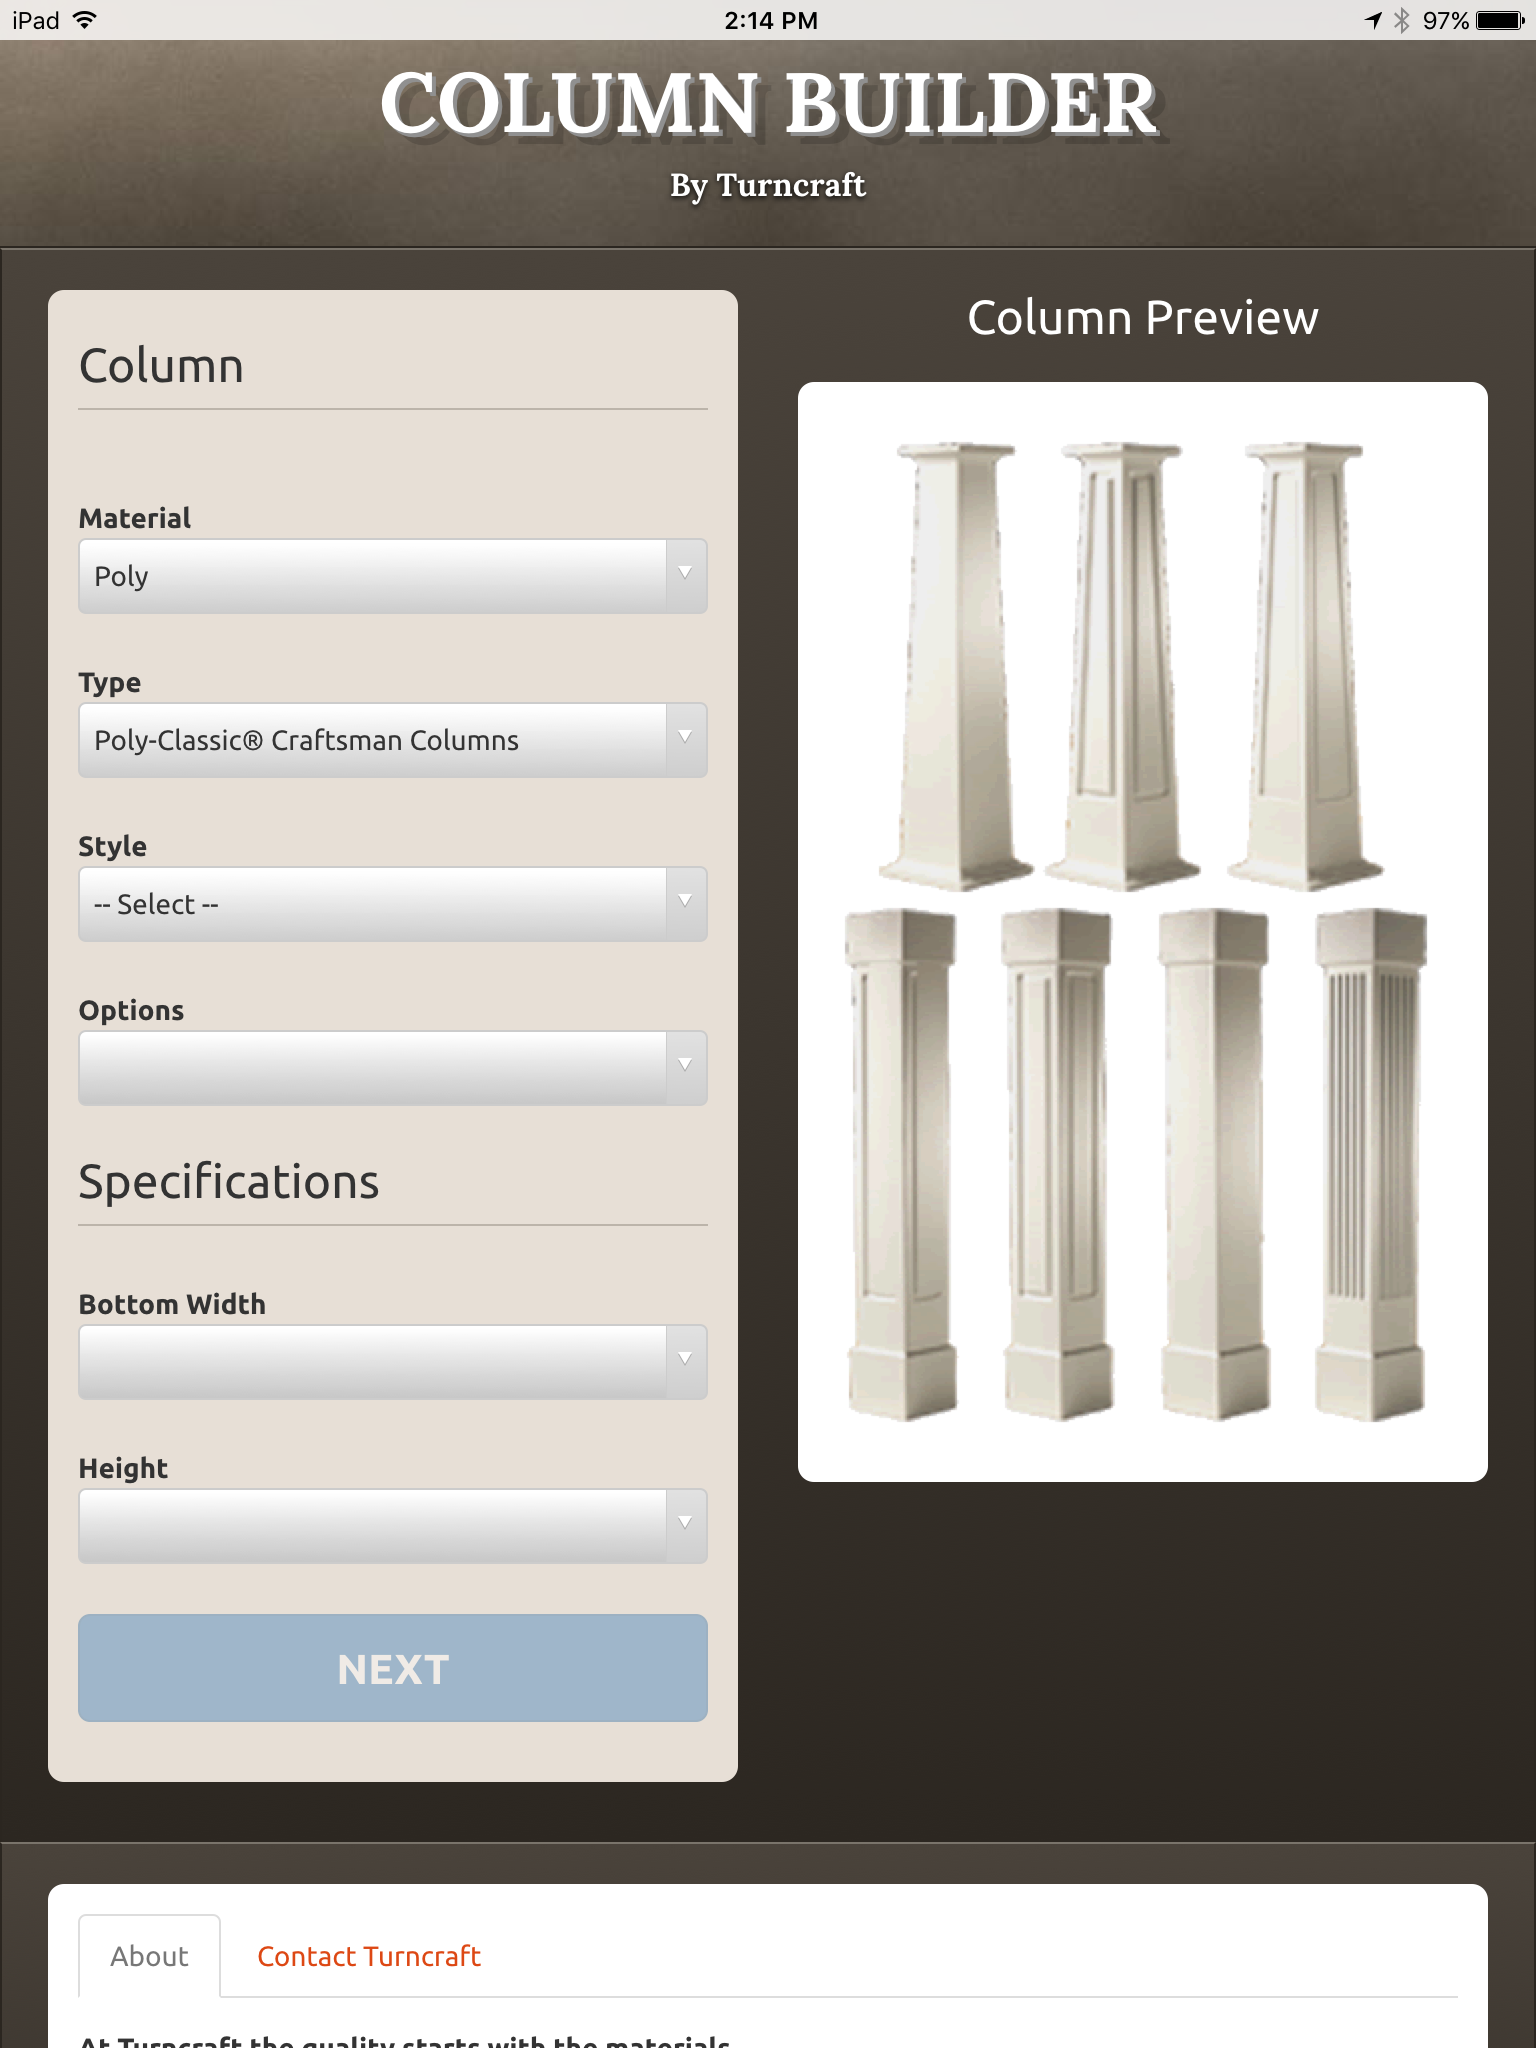 Tool provided by Turncraft to develop a column specification.